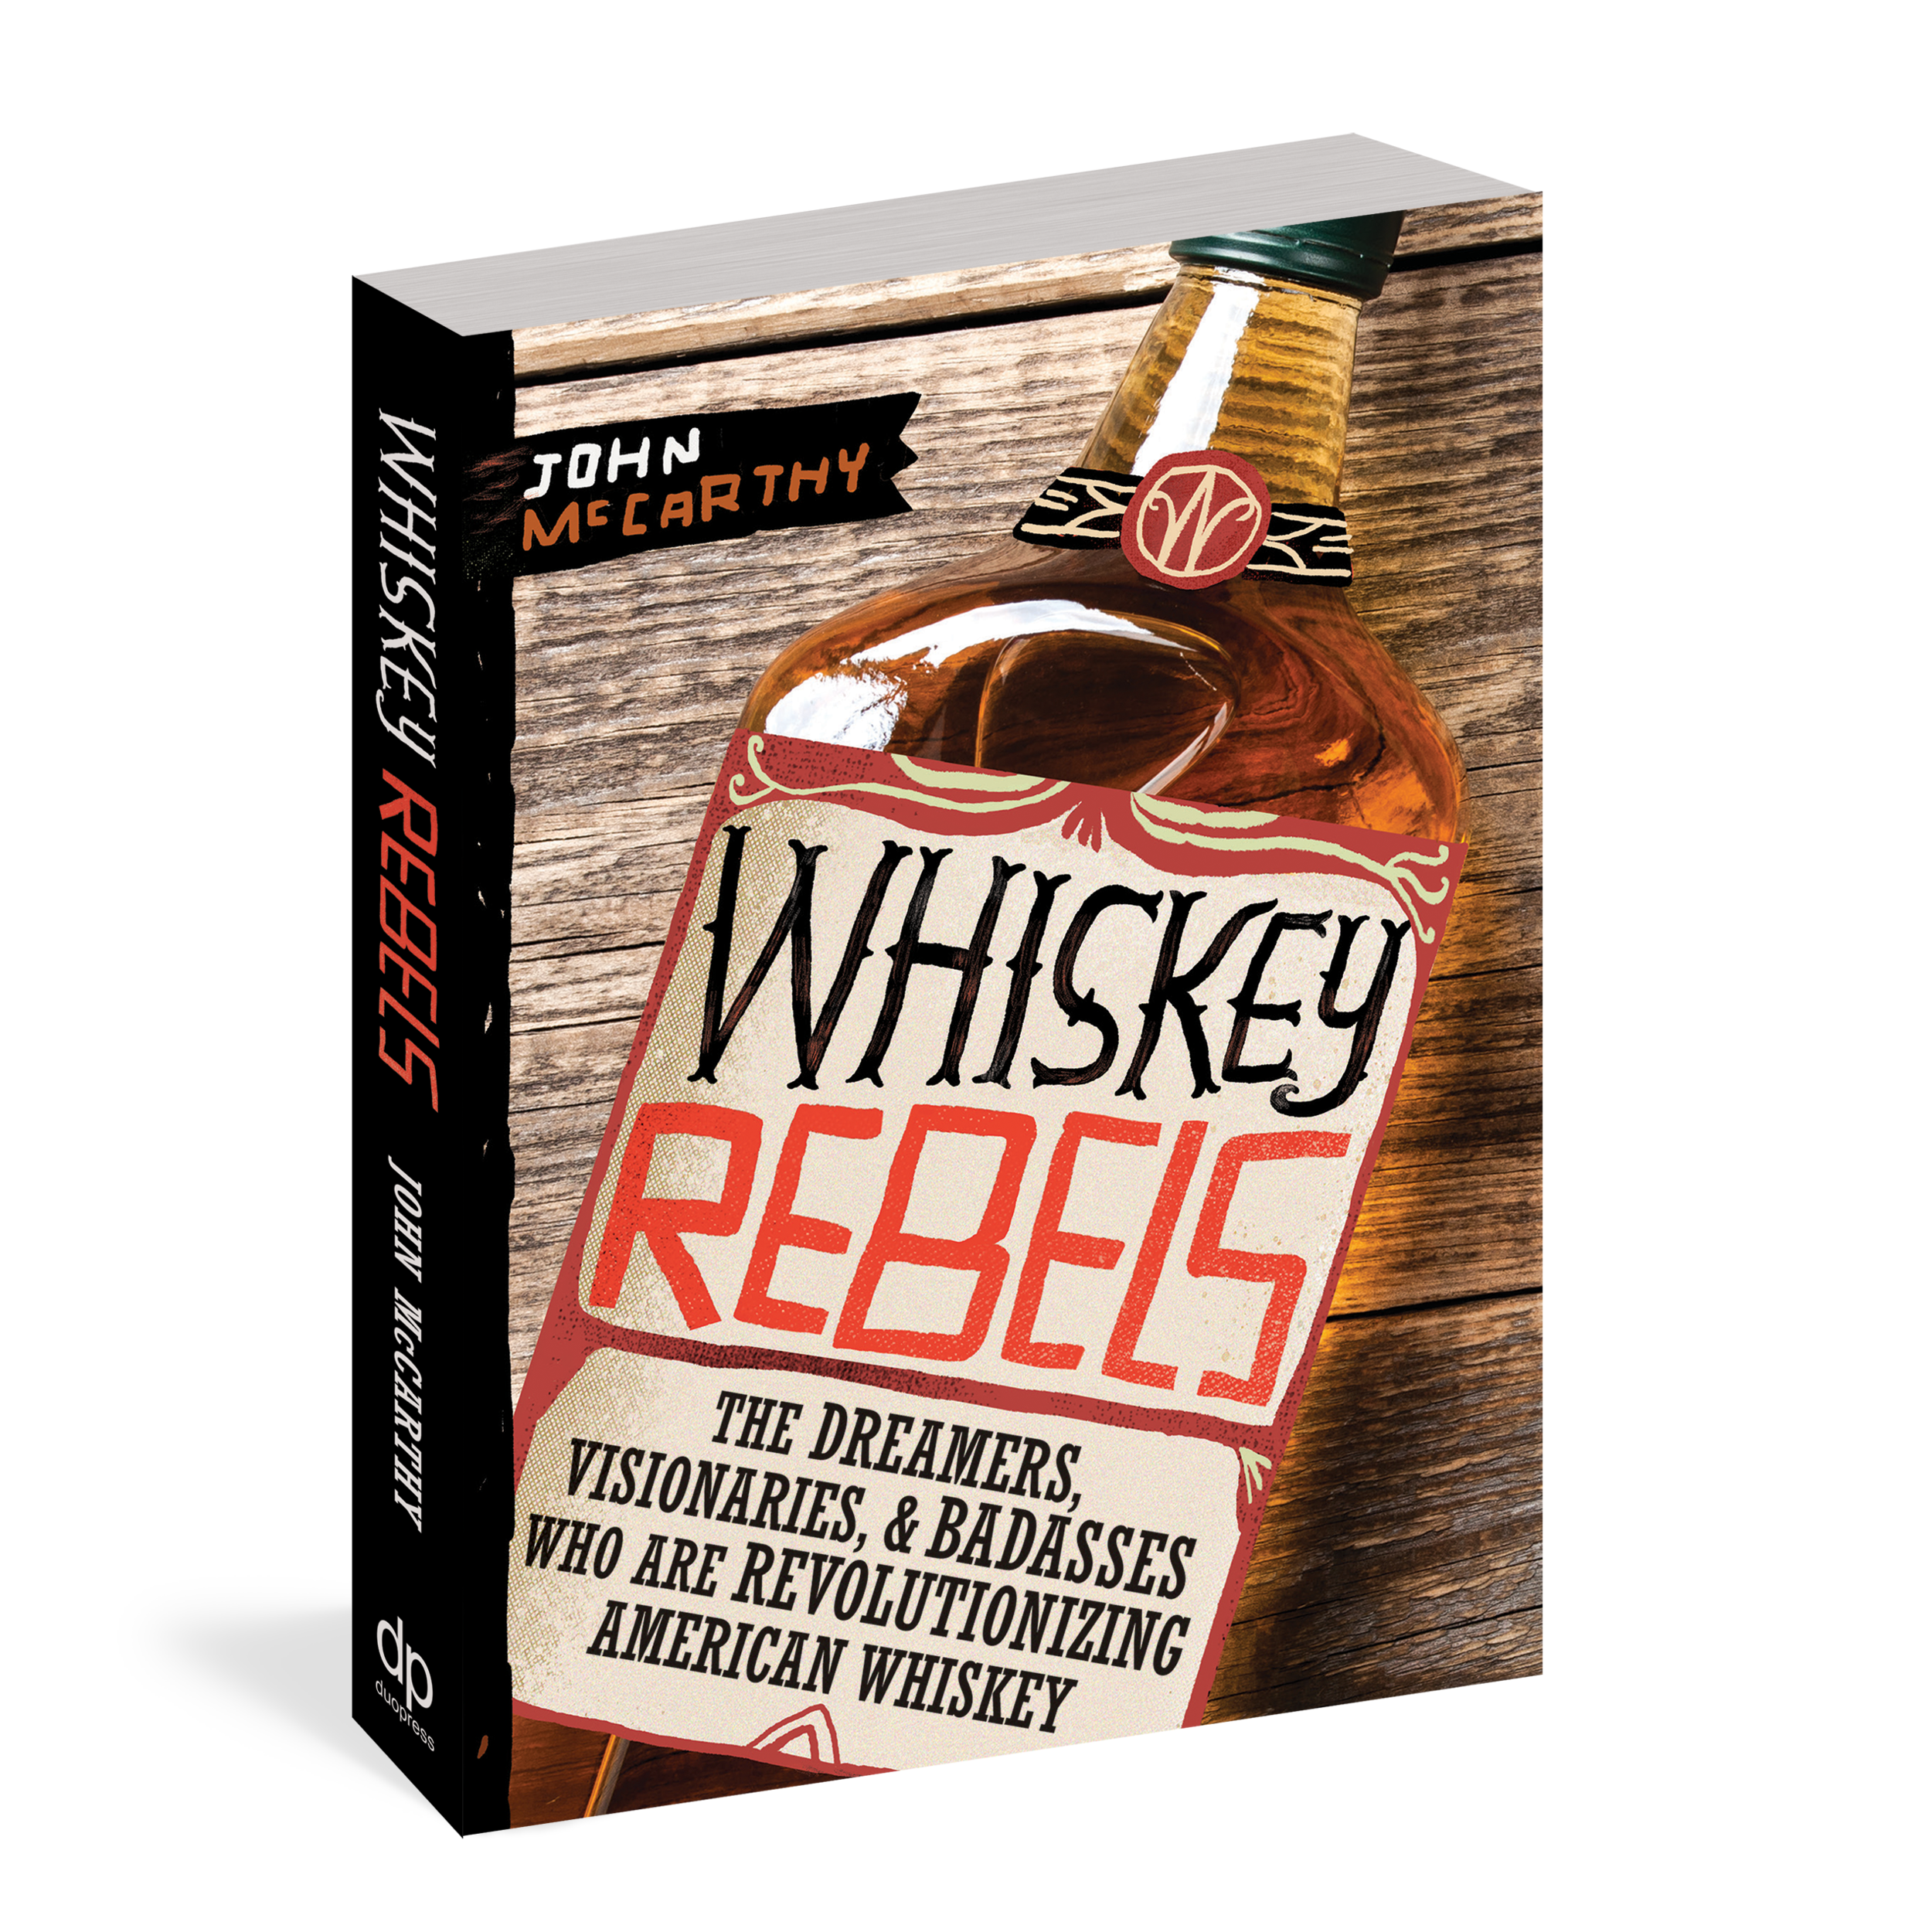 Whiskey Rebels: The Dreamers, Visionaries &amp; Badasses Who Are Revolutionizing American Whiskey (Copy) (Copy) (Copy)